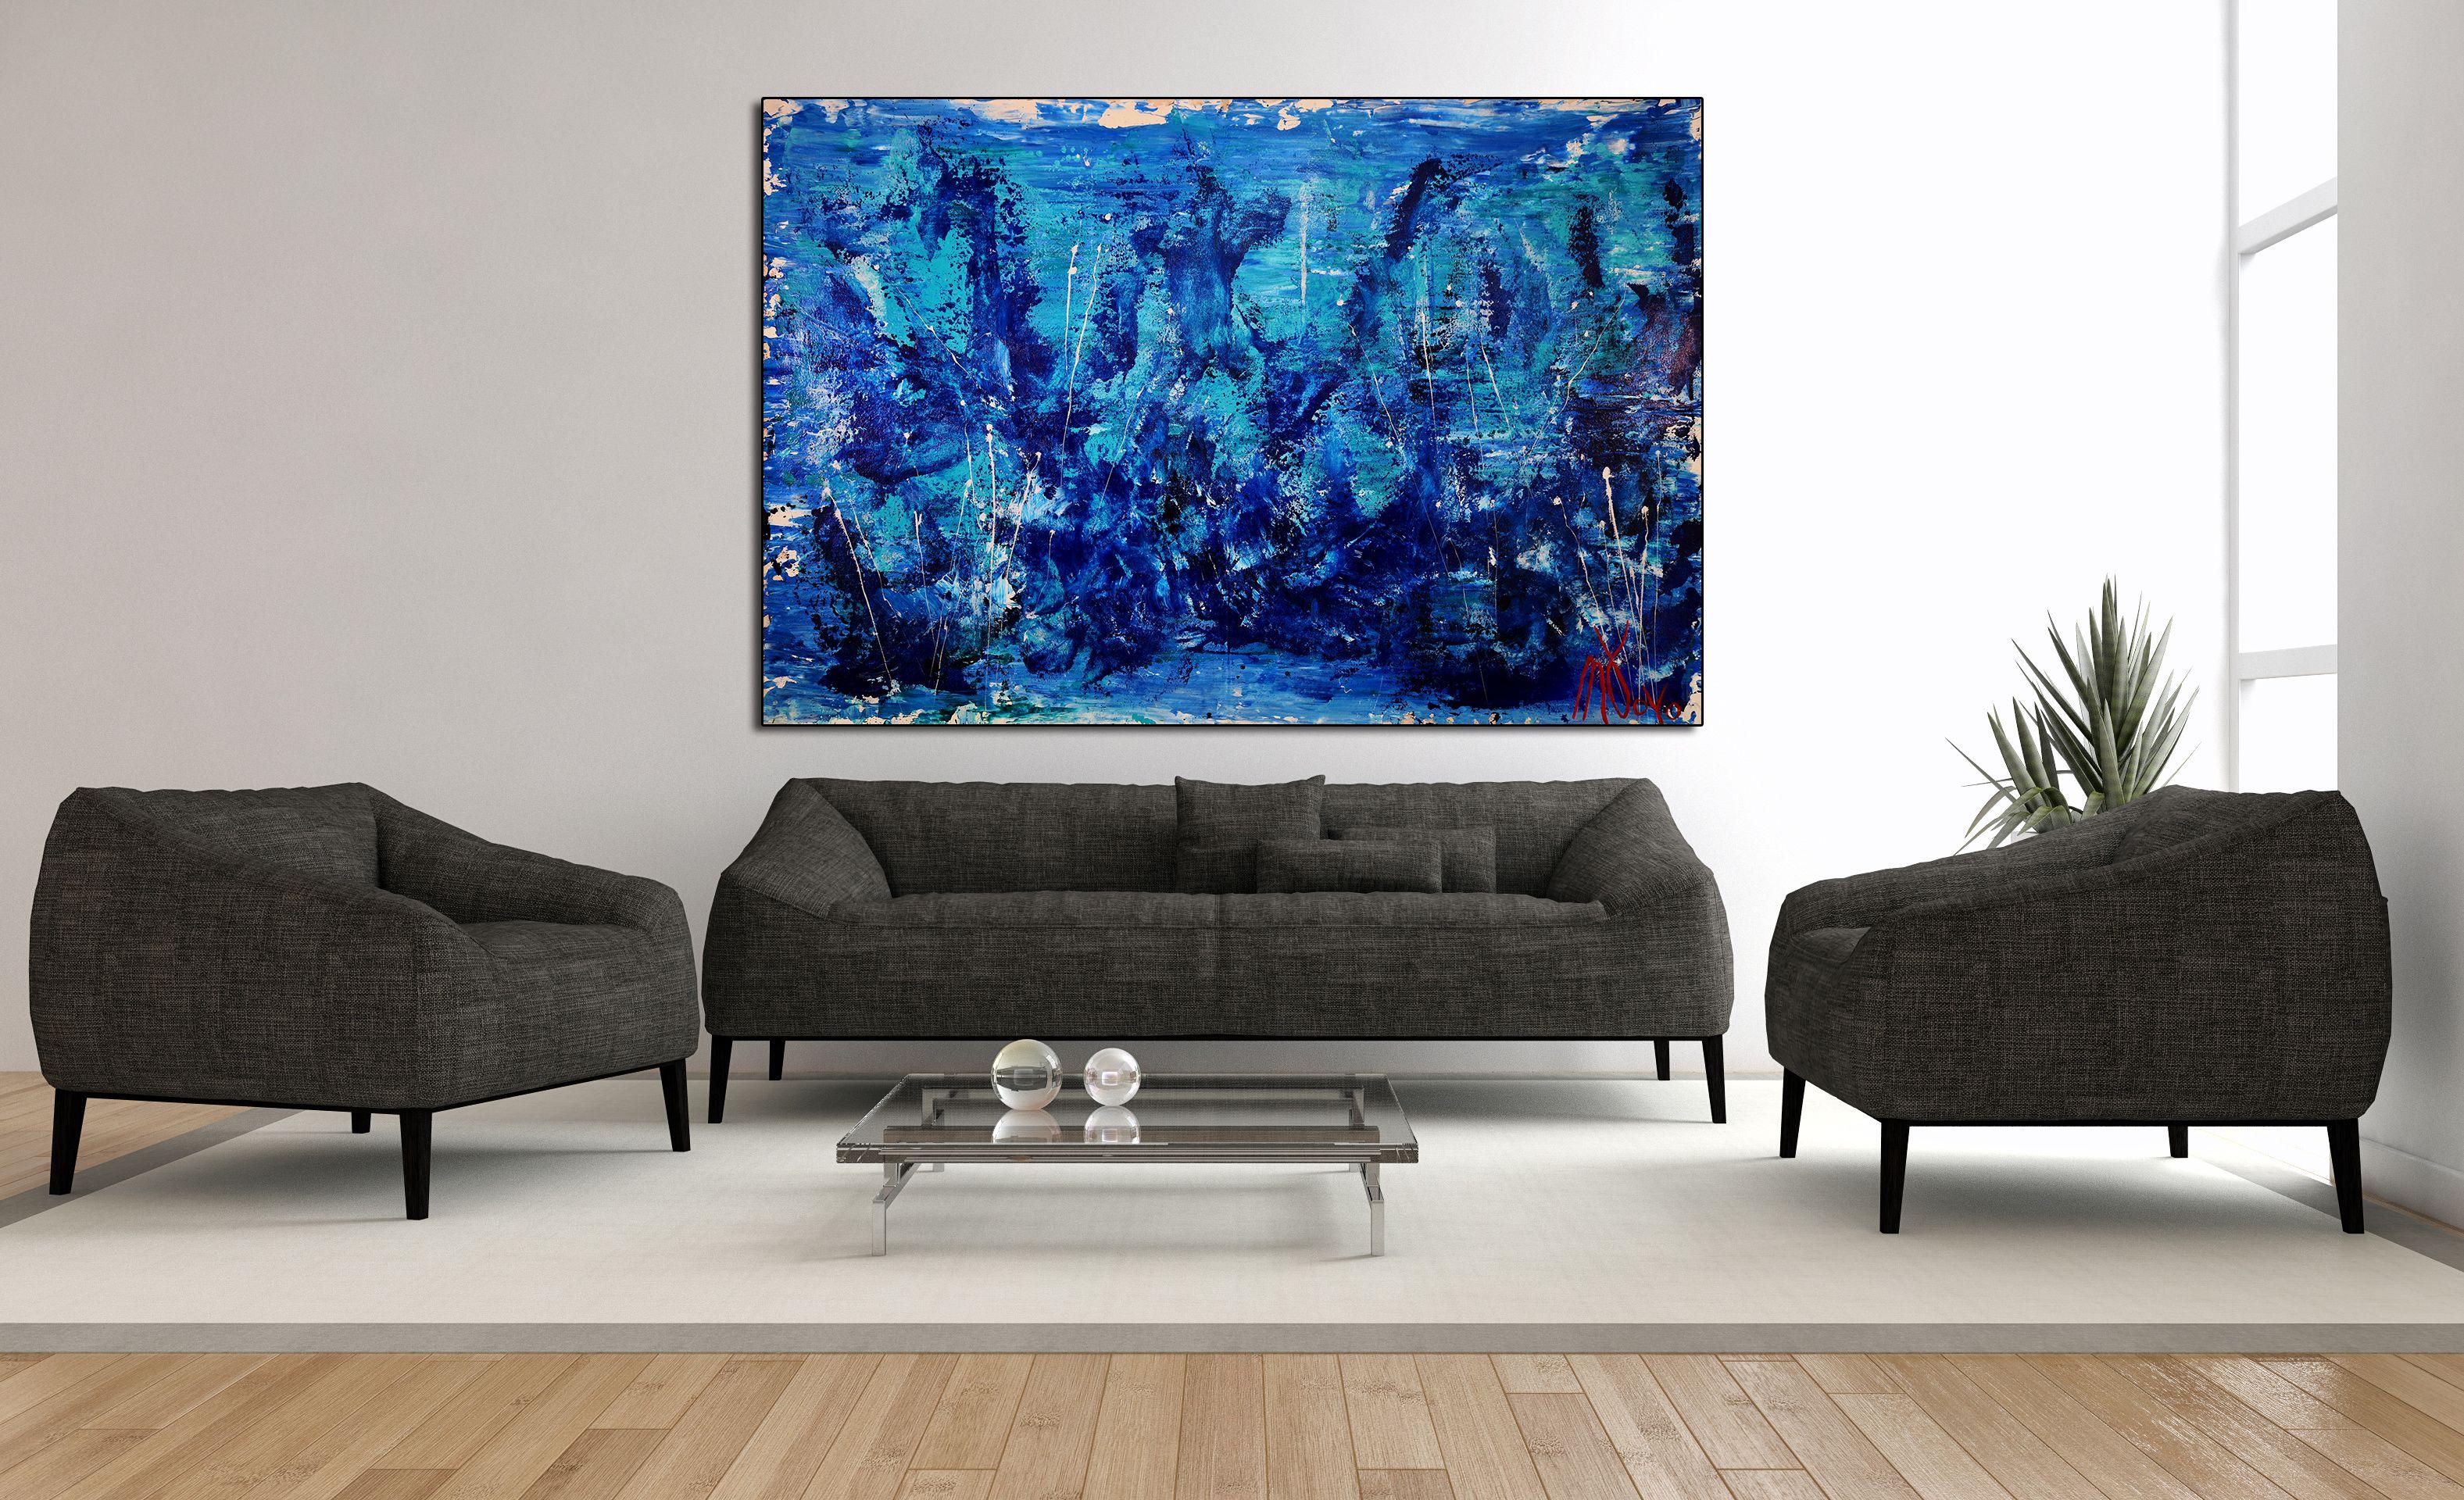 Acrylic action painting gestural big bold paint strokes different shades of blue and dark purple. Drizzles and drips of iridescent paint all over the deep color palette and iridescent mediums all around the white background. Statement piece!     